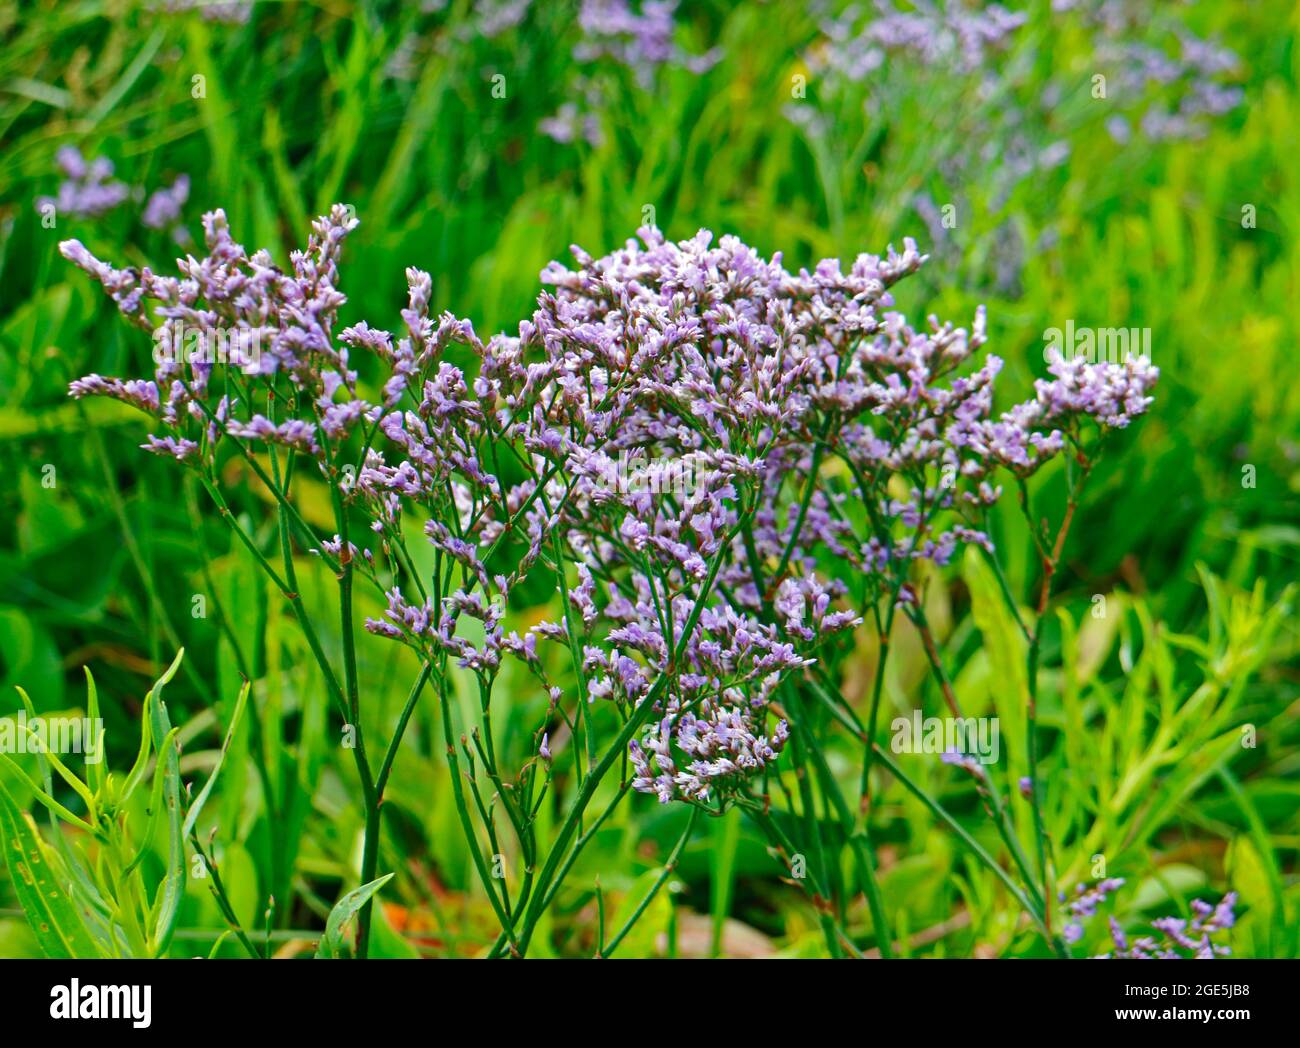 A view of the flowers of the Common Sea-lavender, Limonium vulgare, on the North Norfolk coast at Blakeney, Norfolk, England, United Kingdom. Stock Photo